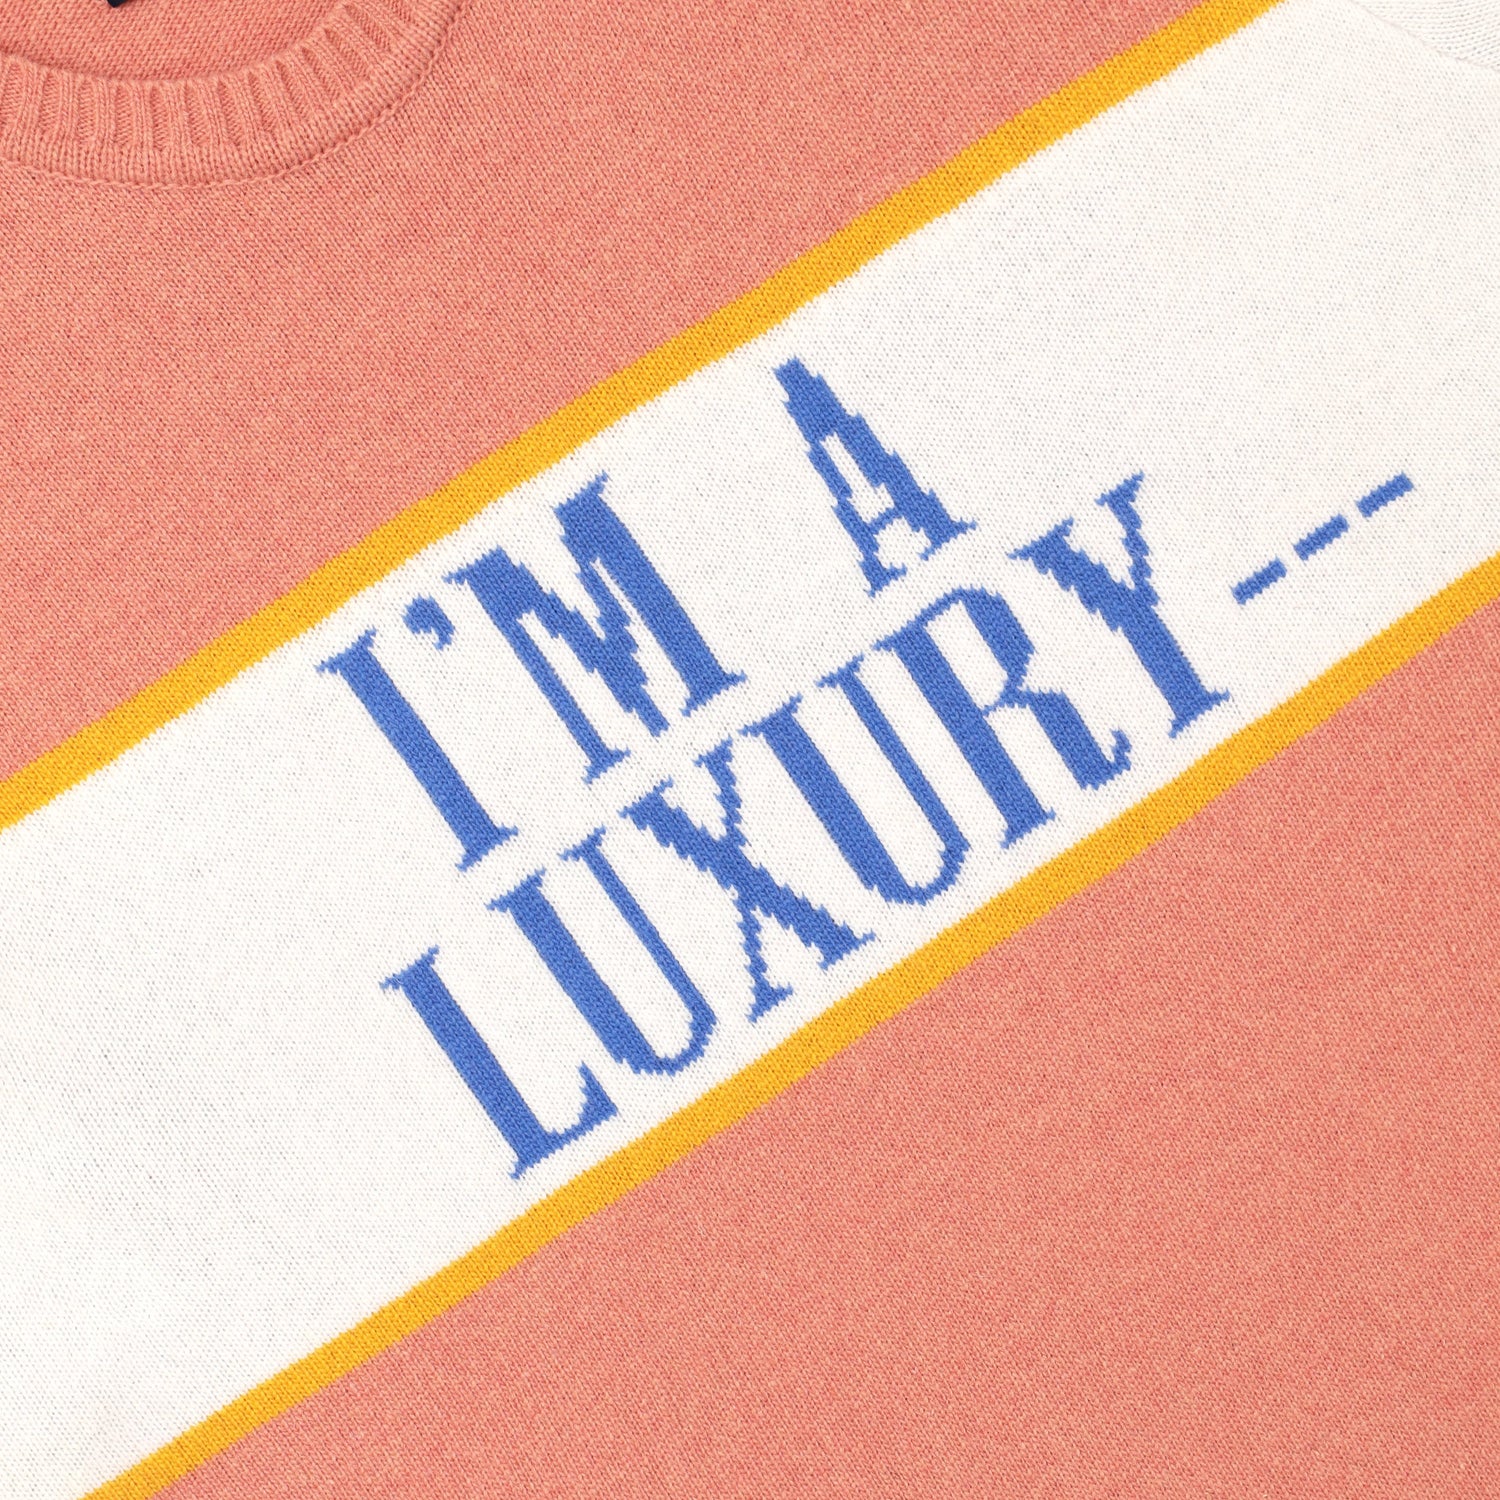 Detail of "I'M A LUXURY ---".